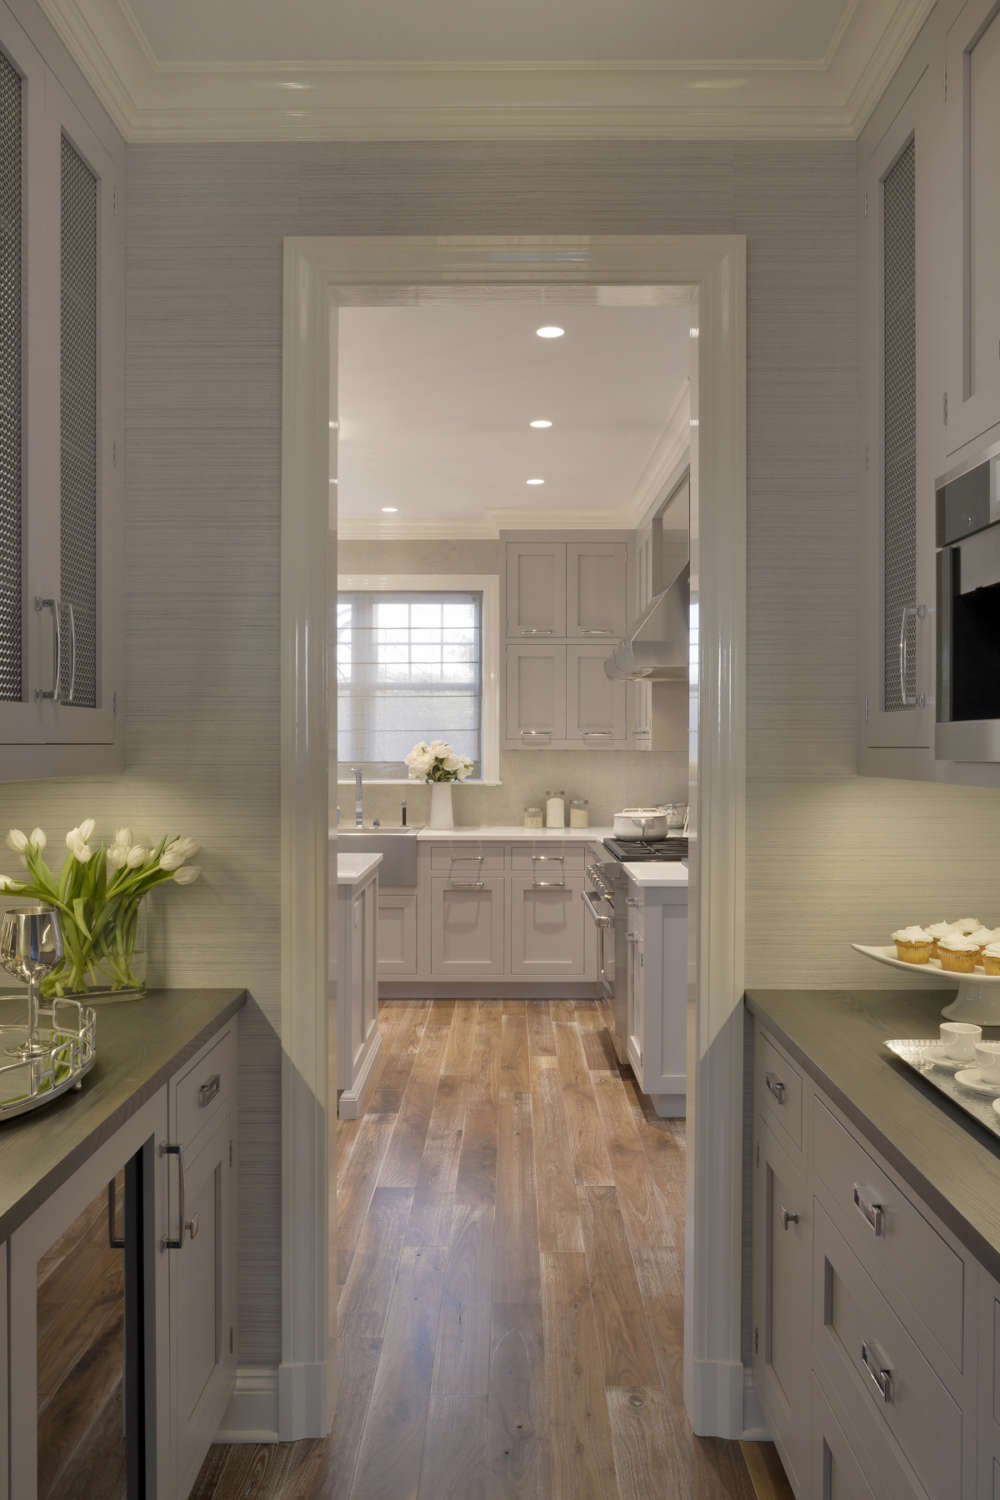 Butler's pantry features light gray painted shaker style Biotta cabinetry with metal door inserts, gray walls and espresso countertops. Pantry opens into an expansive kitchen.